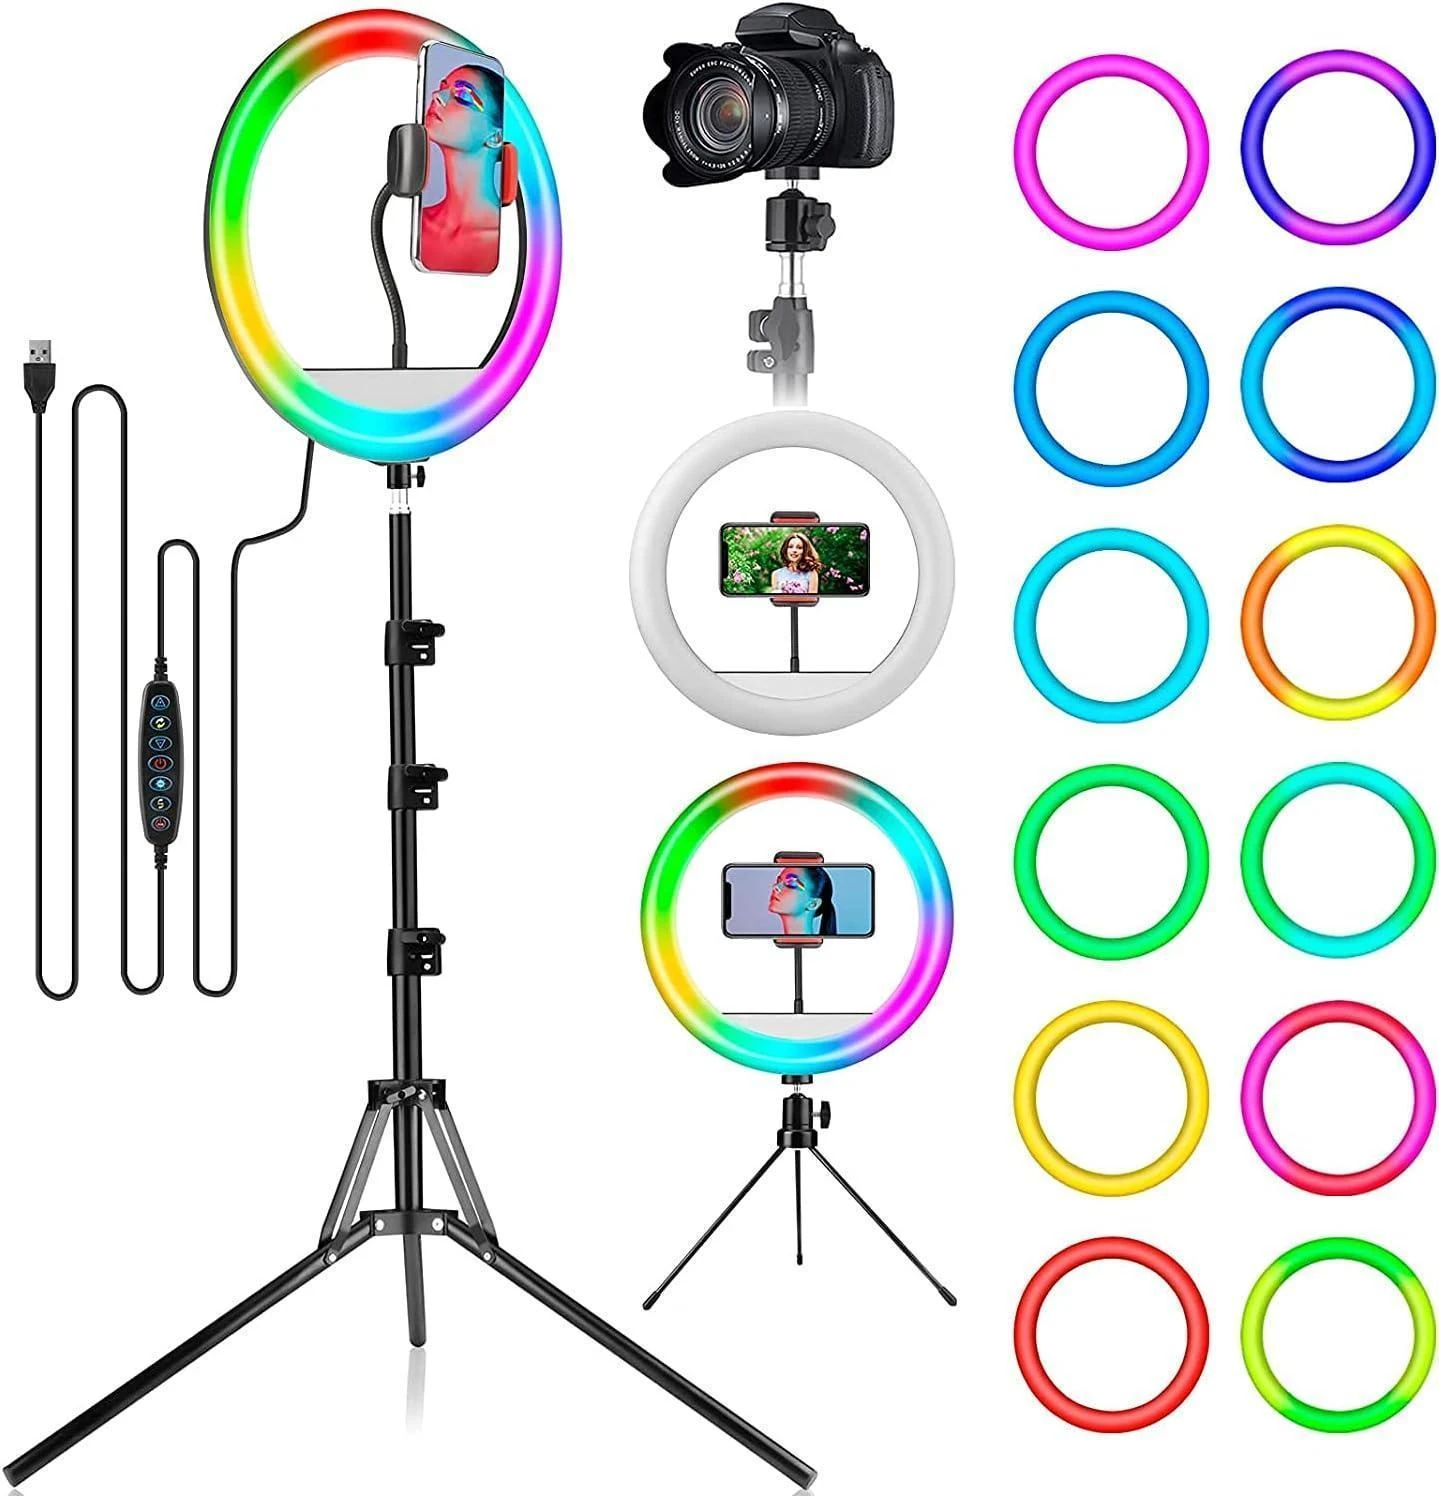 SELFIE RING 14 INCH RGB LIGHT WITH STAND 